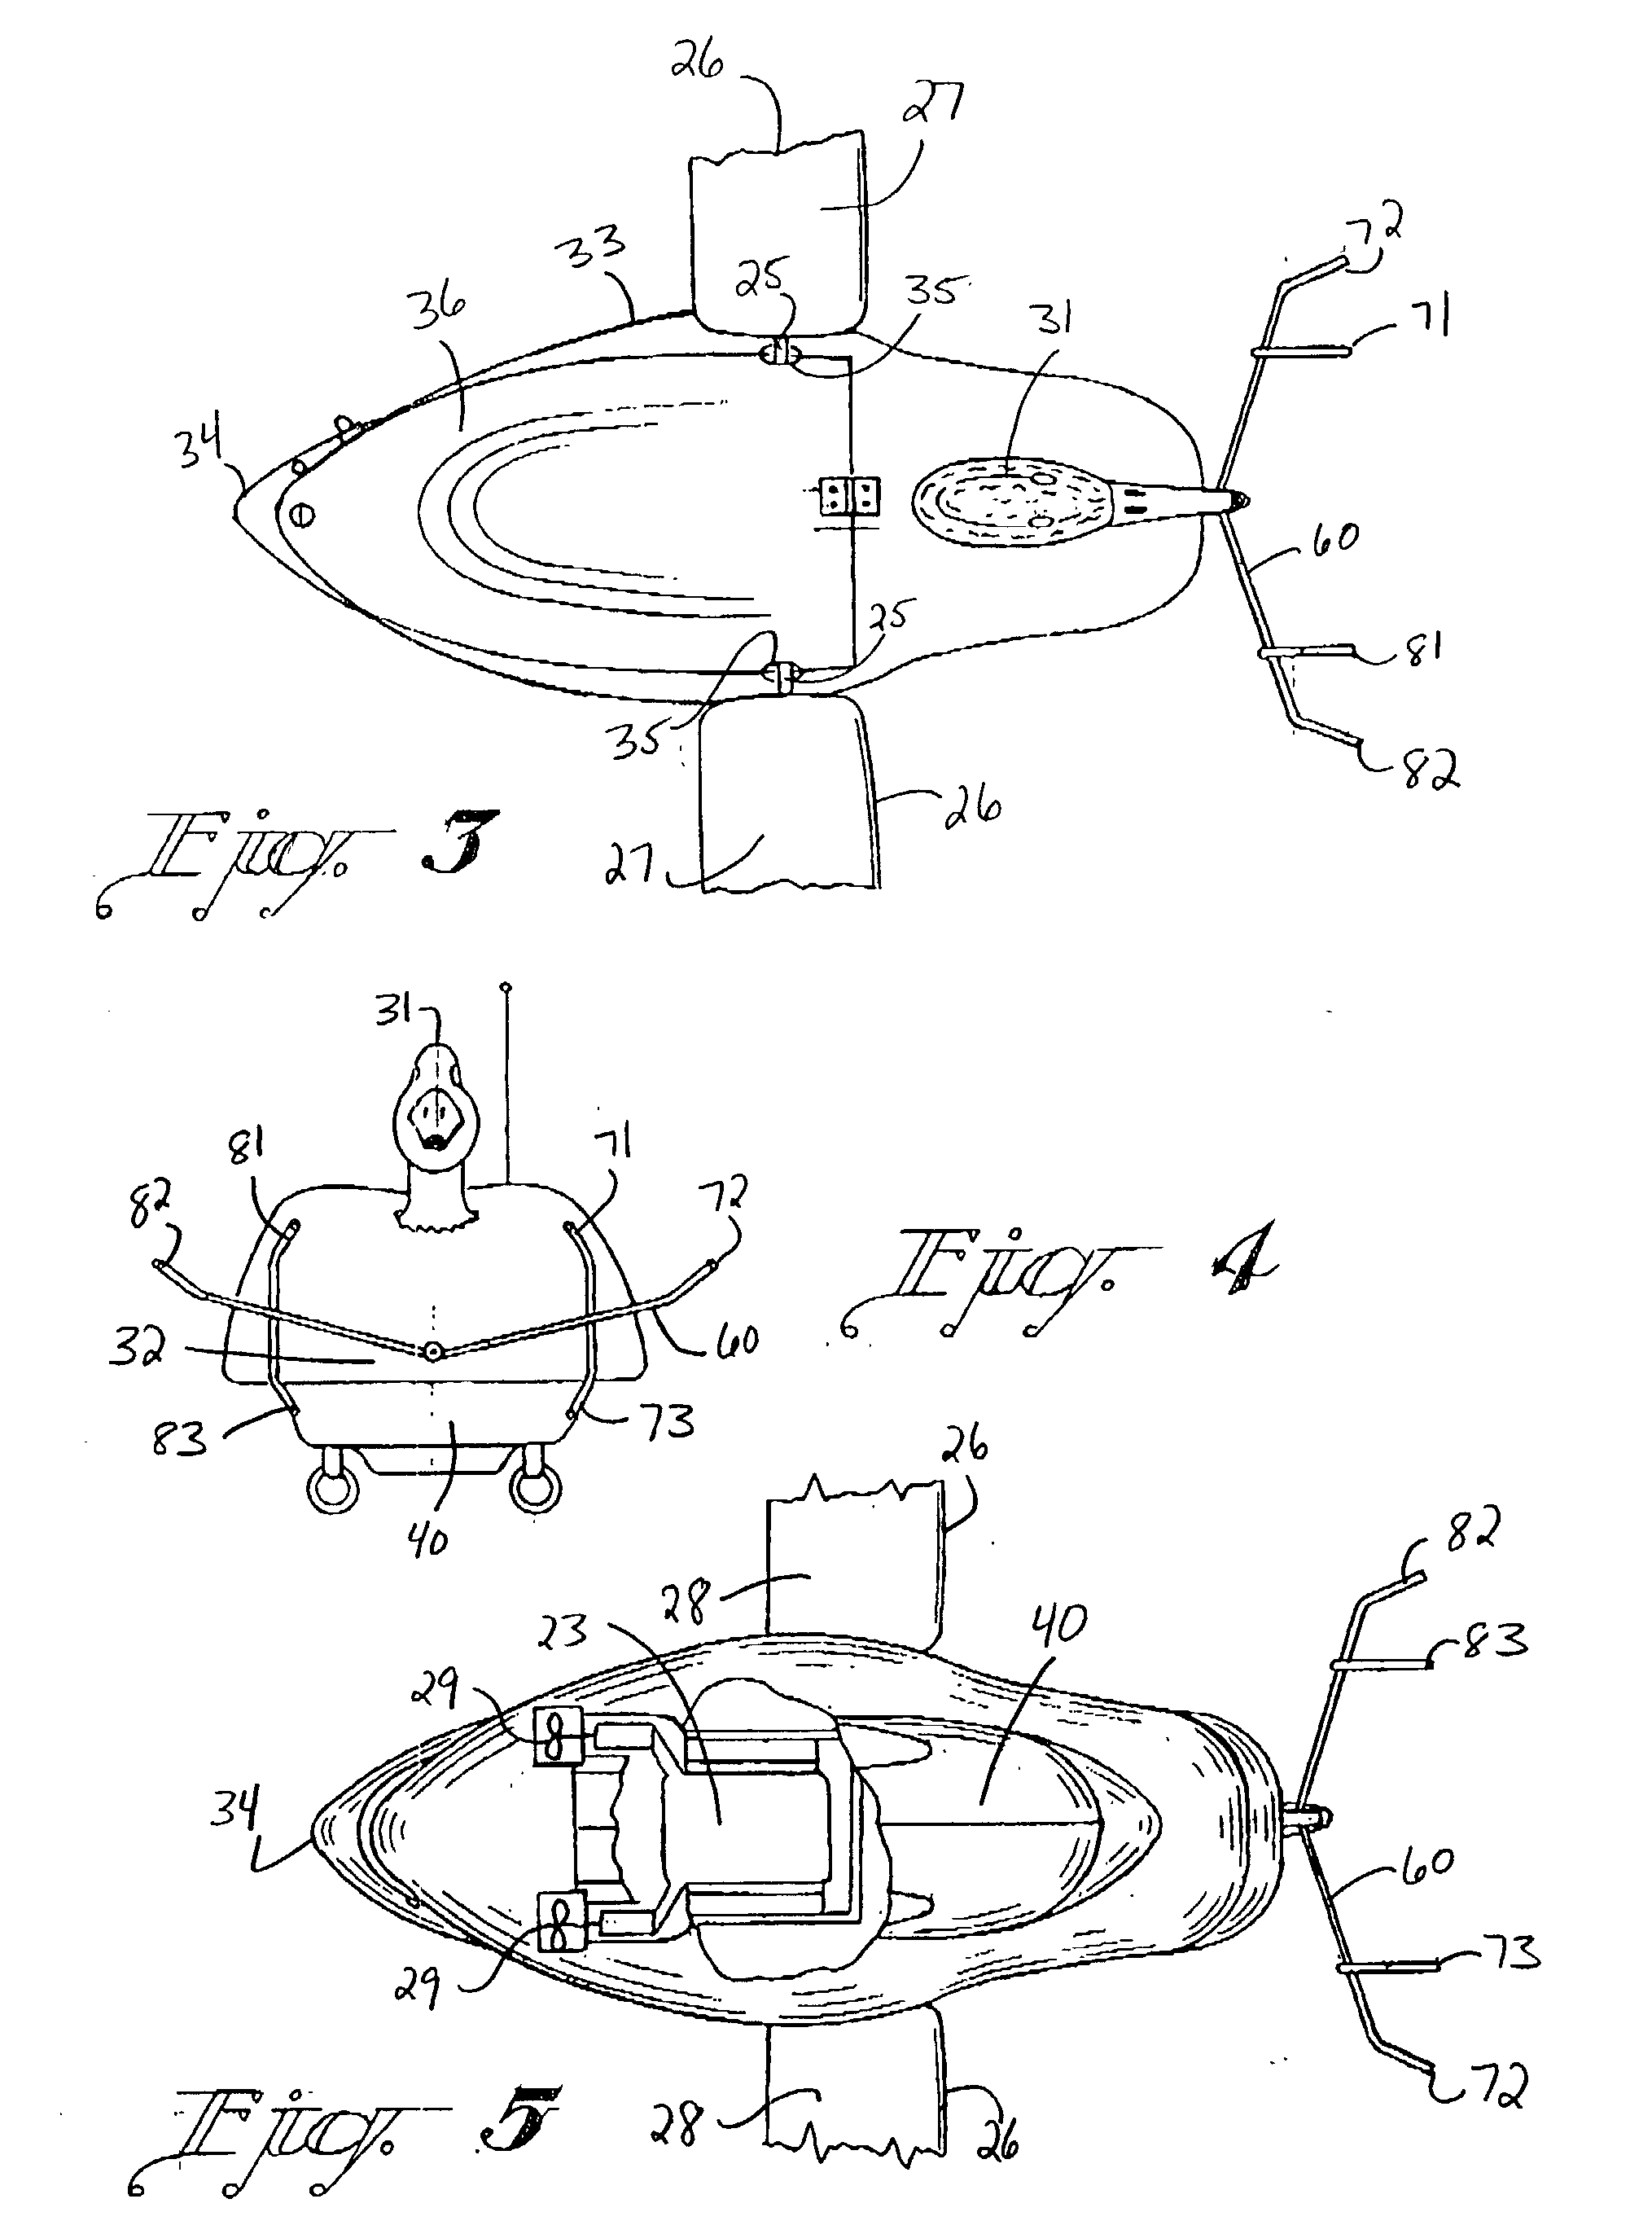 Method and apparatus for retrieving game from a water surface